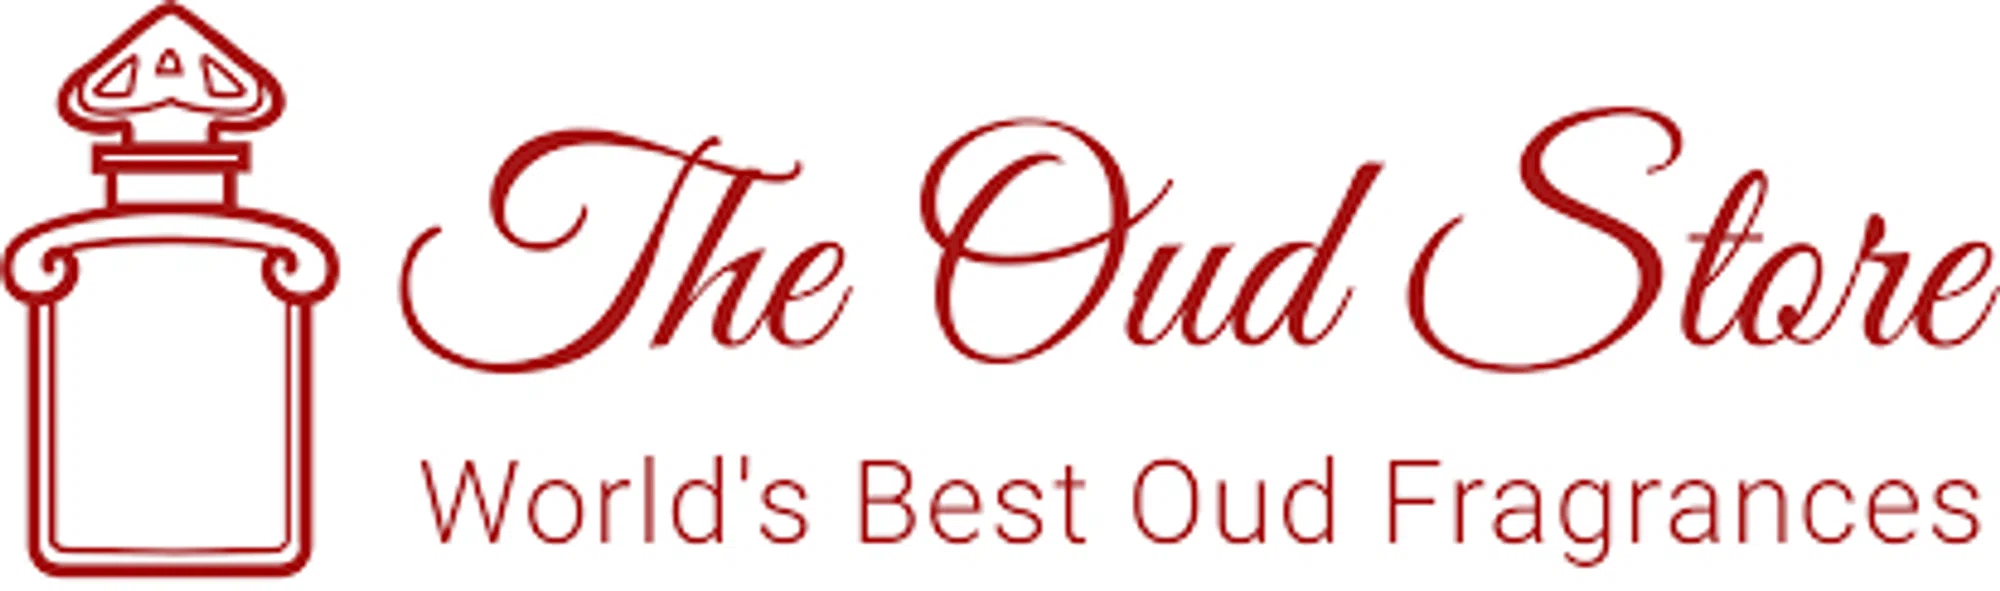 The Oud Store